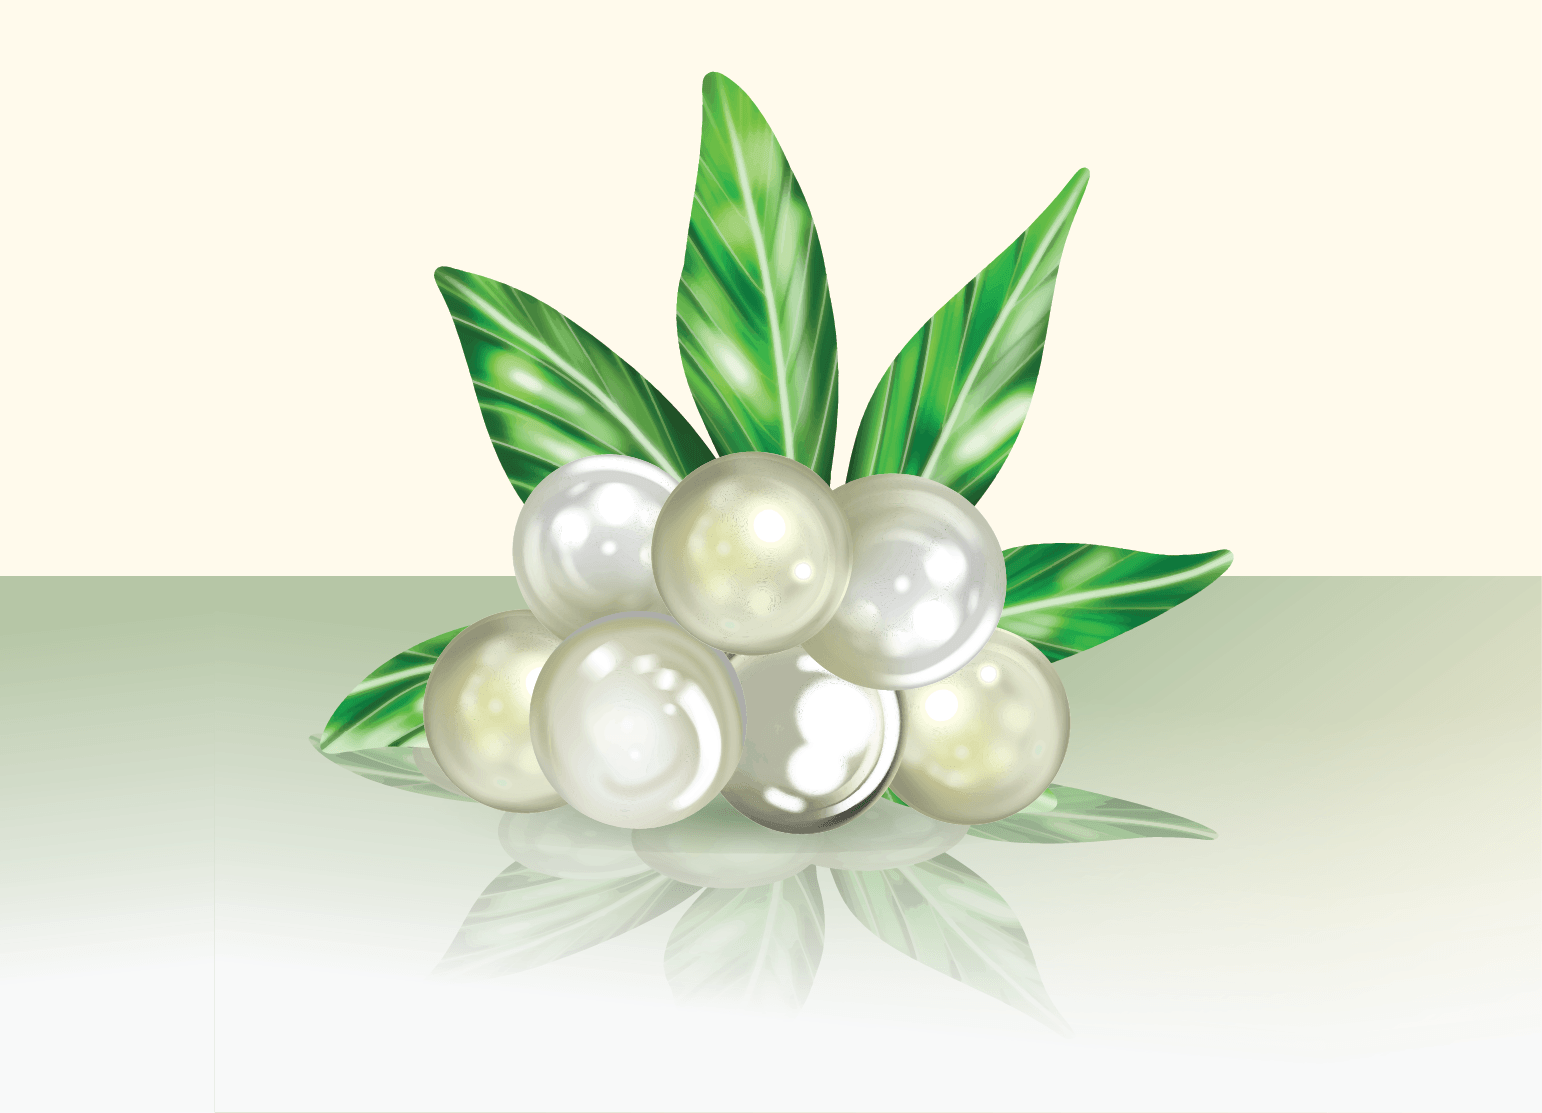 How to Care for Pearls?